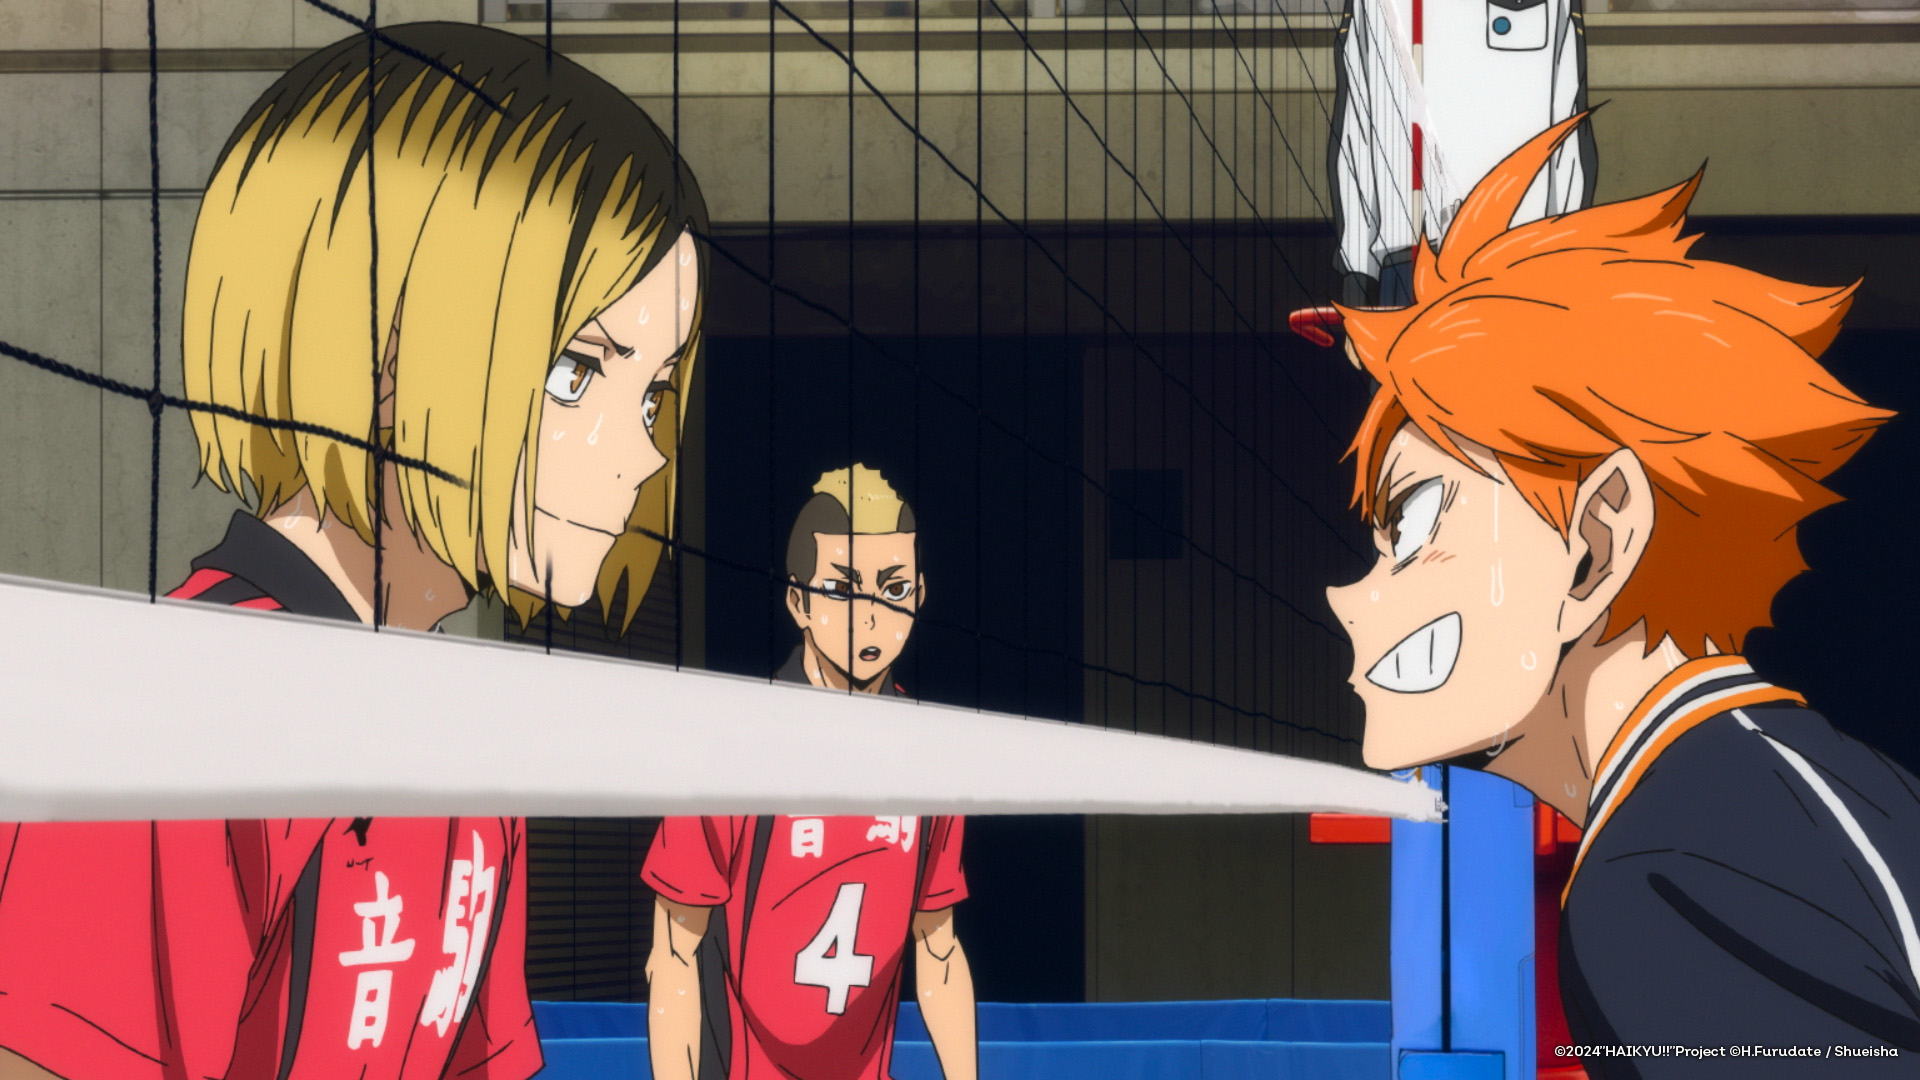 Crunchyroll reveals the English subtitled trailer for HAIKYU!! The Dumpster Battle as the anime film hits North American theaters May 31.